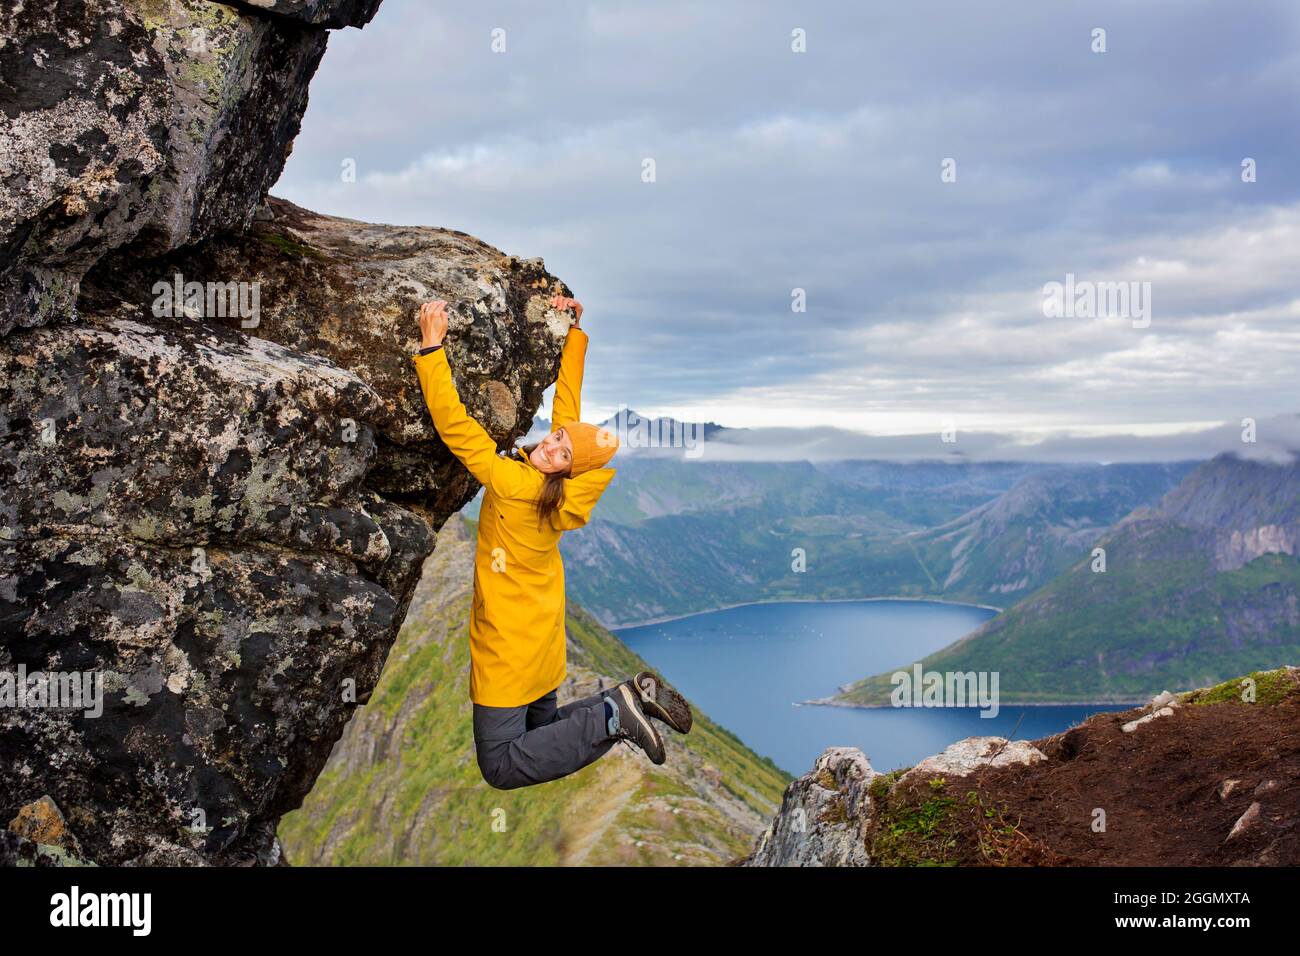 Woman in yellow raincoat, hanging from a rock over Segla mountain on Senja island, North Norway. Amazing beautiful landscape and splendid nature in sc Stock Photo